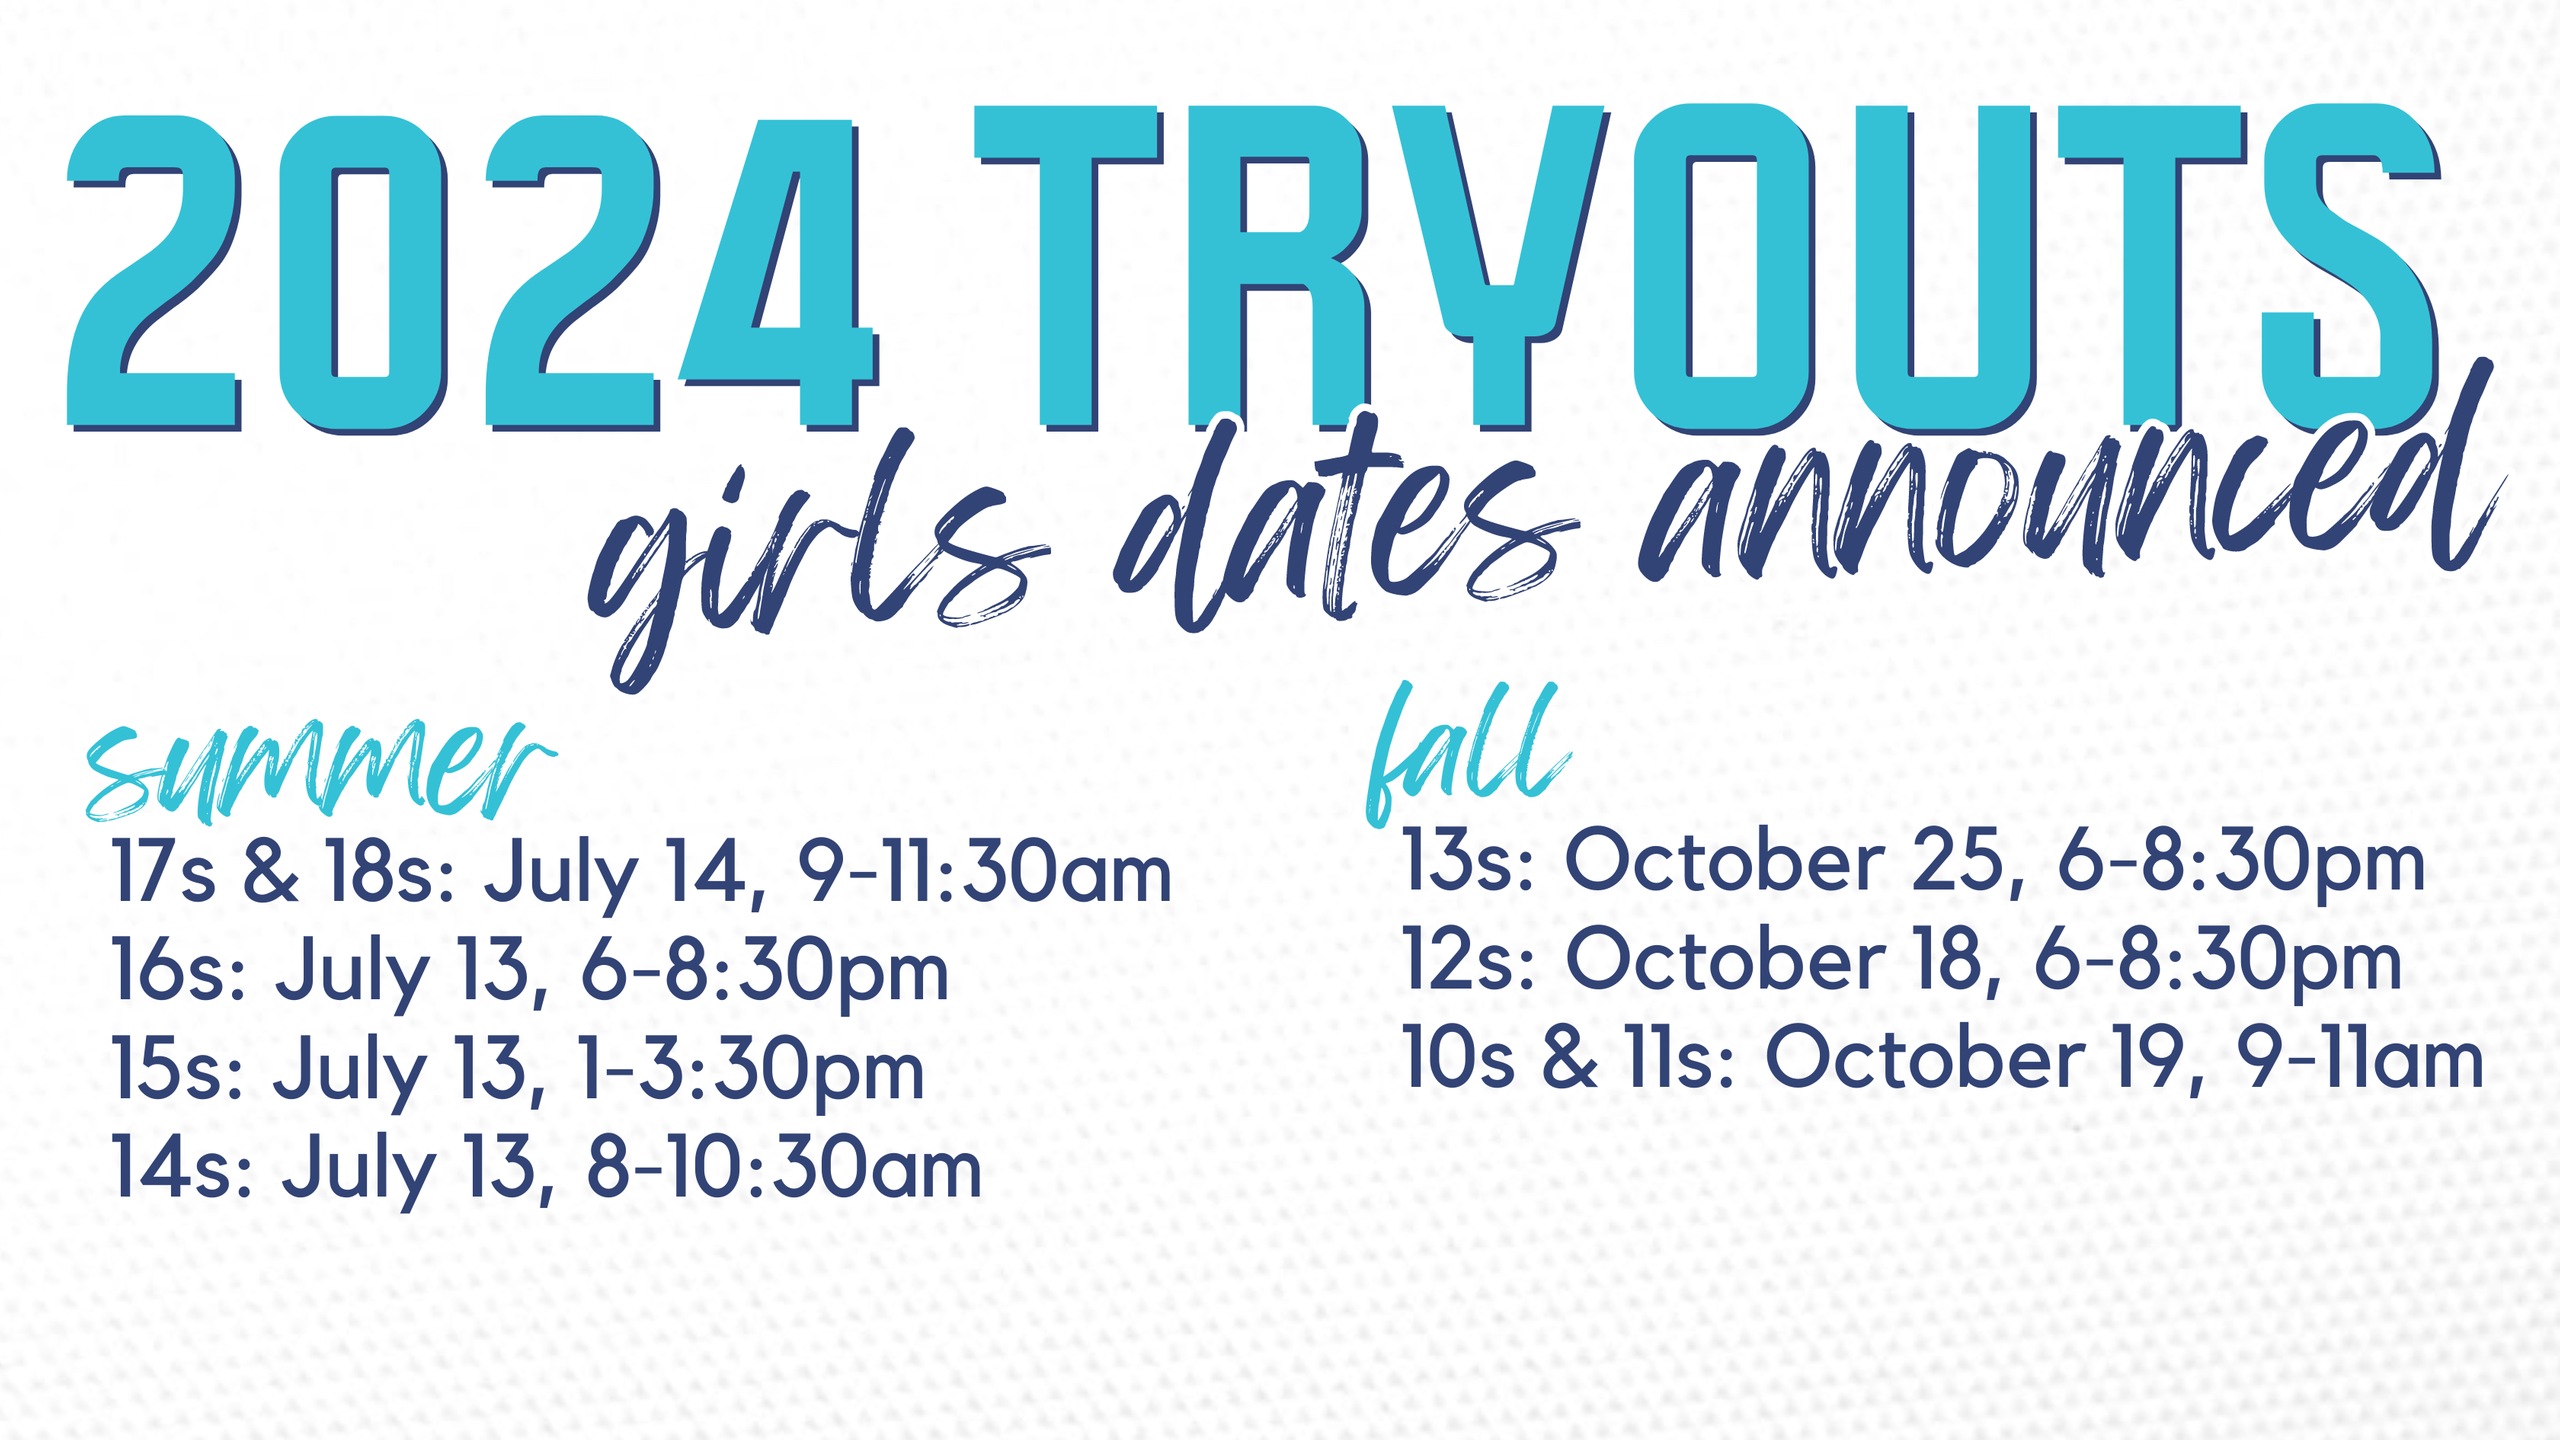 2024-25 Tentative Girls Tryout Dates Announced